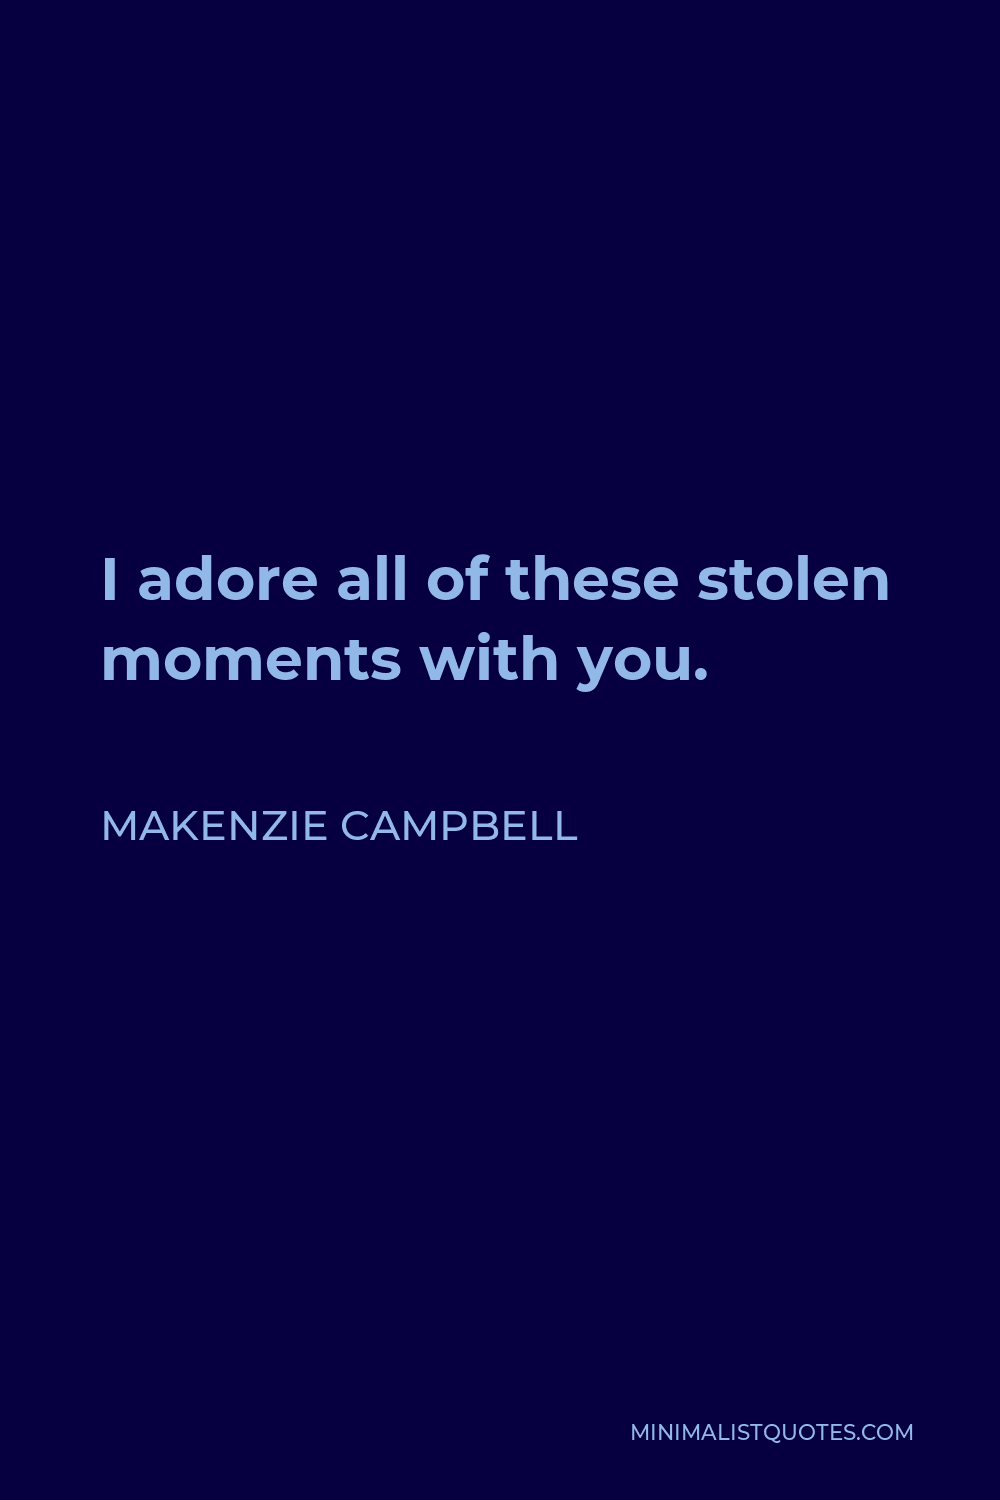 Makenzie Campbell Quote - I adore all of these stolen moments with you.